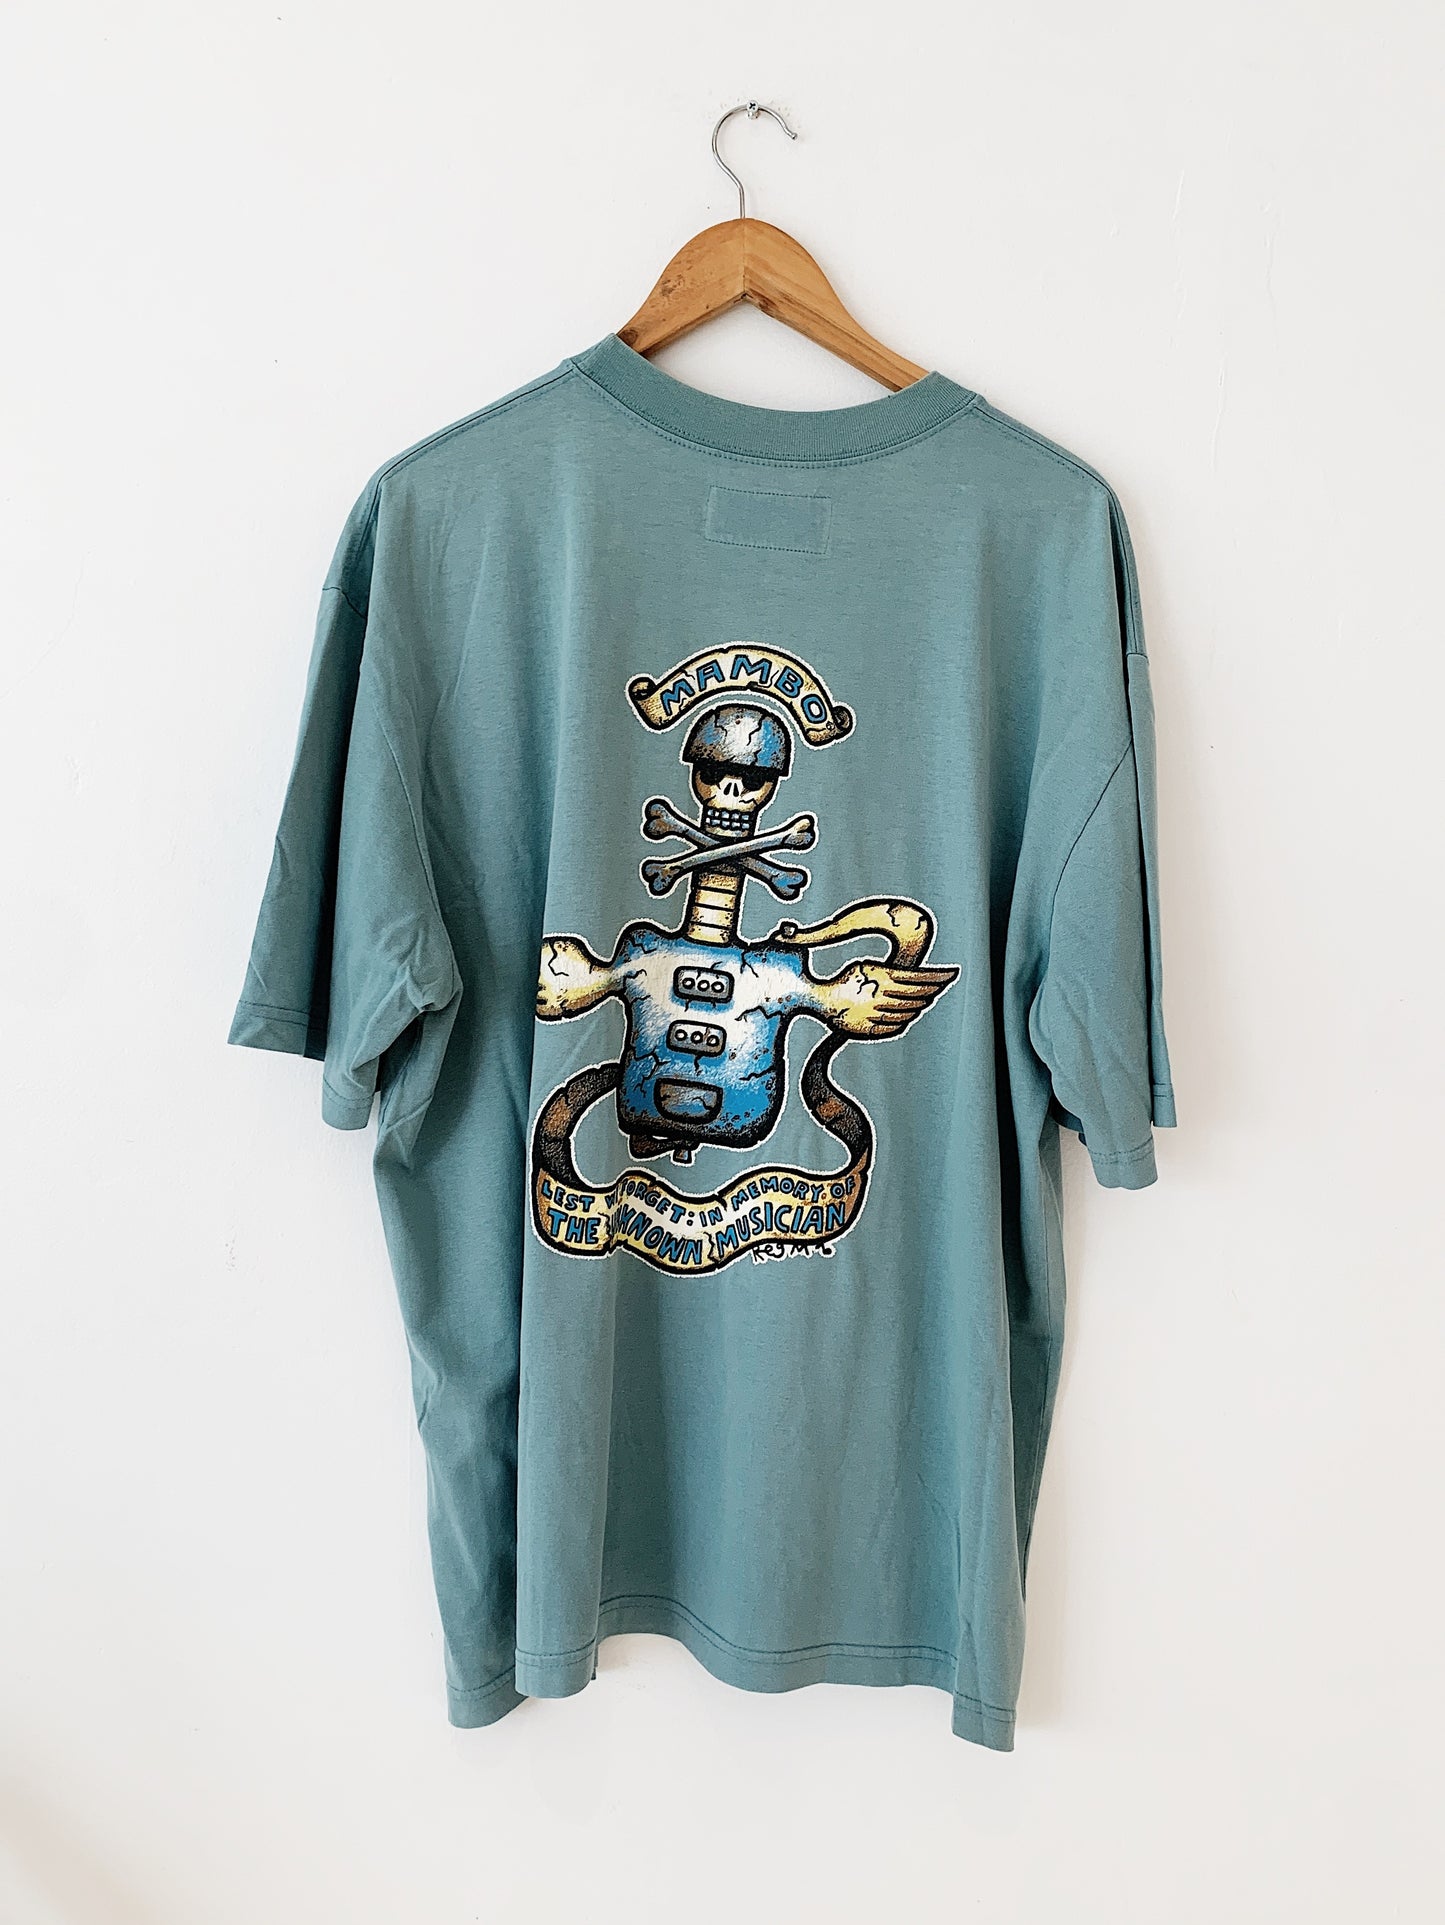 Vintage Reg Mombassa for Mambo "Lest We Forget - In Memory Of The Unknown Musician" '99 T-Shirt